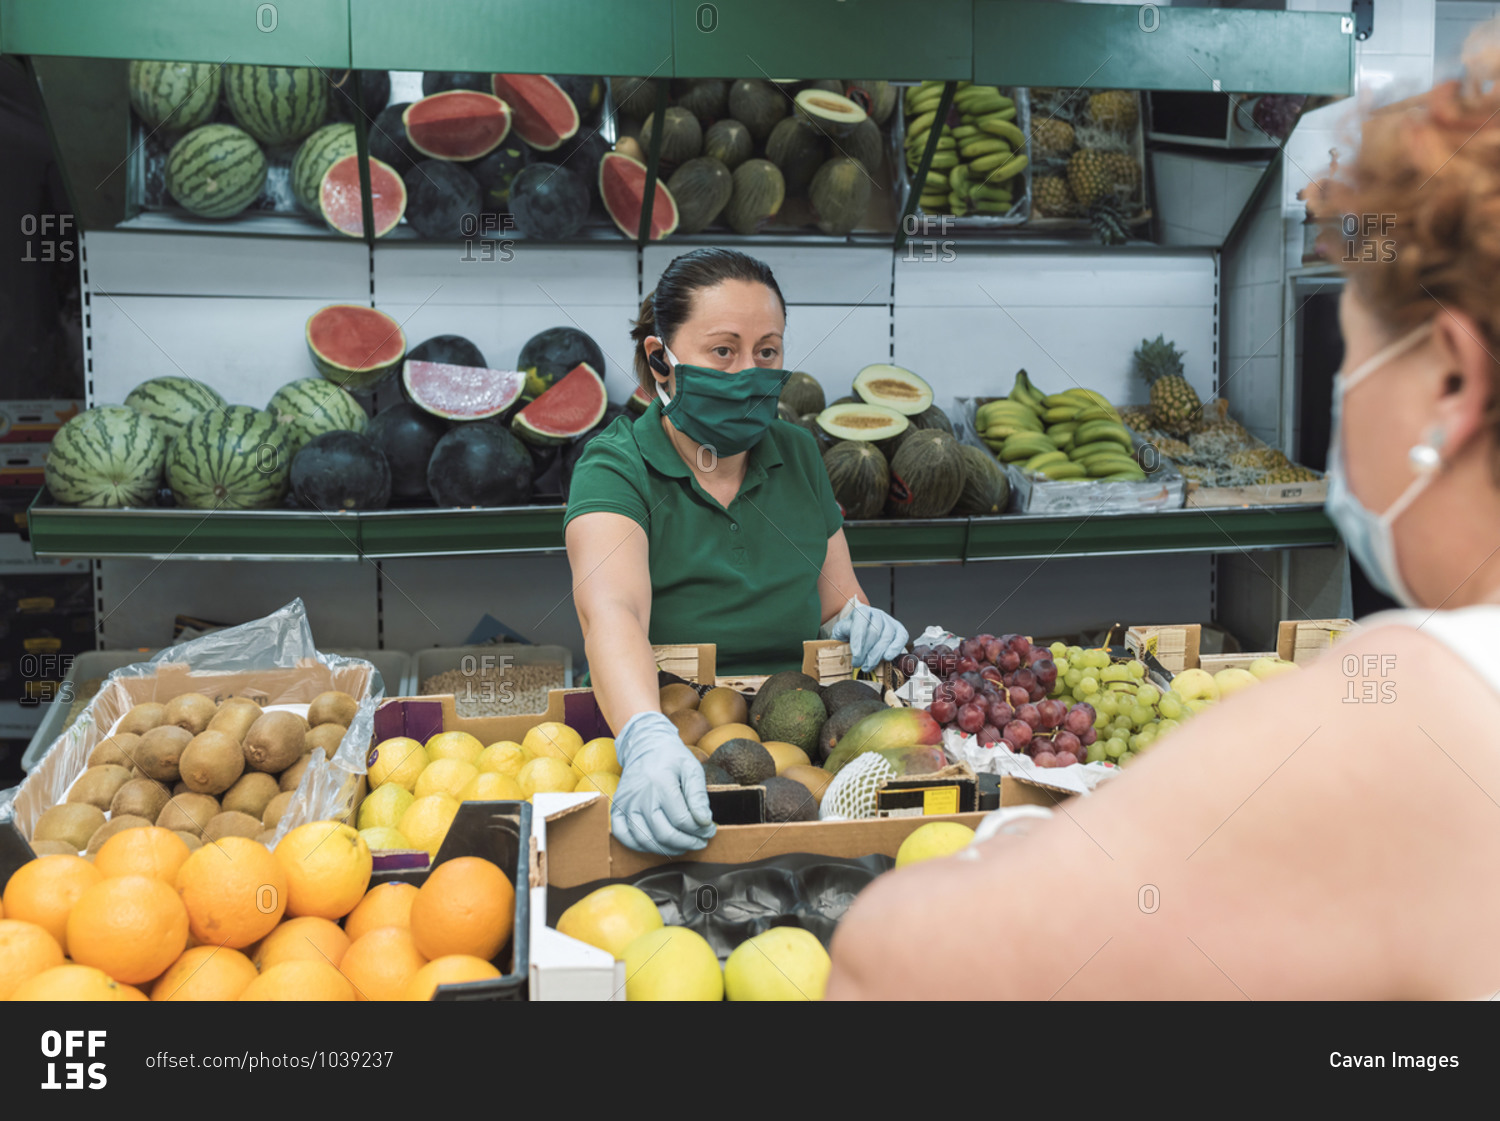 A shopkeeper with a mask attends to a customer in grocery store